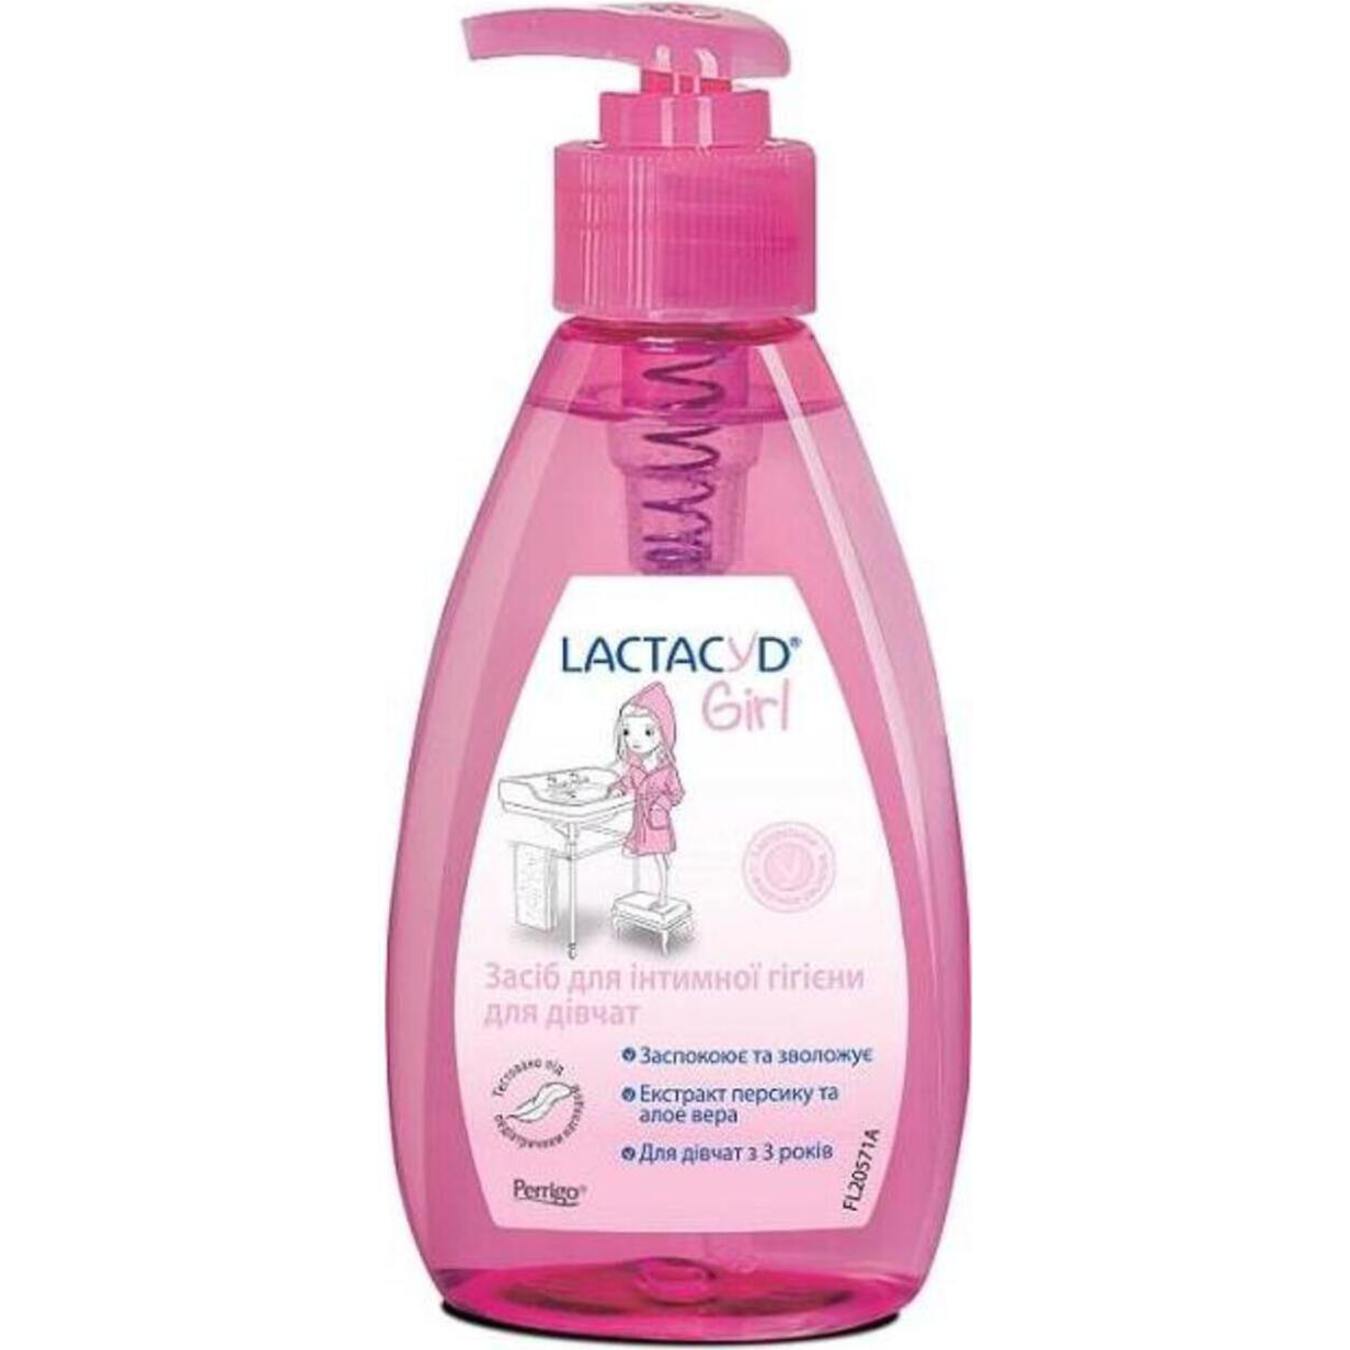 Lactacyd With Dispenser For Girls Intimate Hygiene Gel 200ml 2